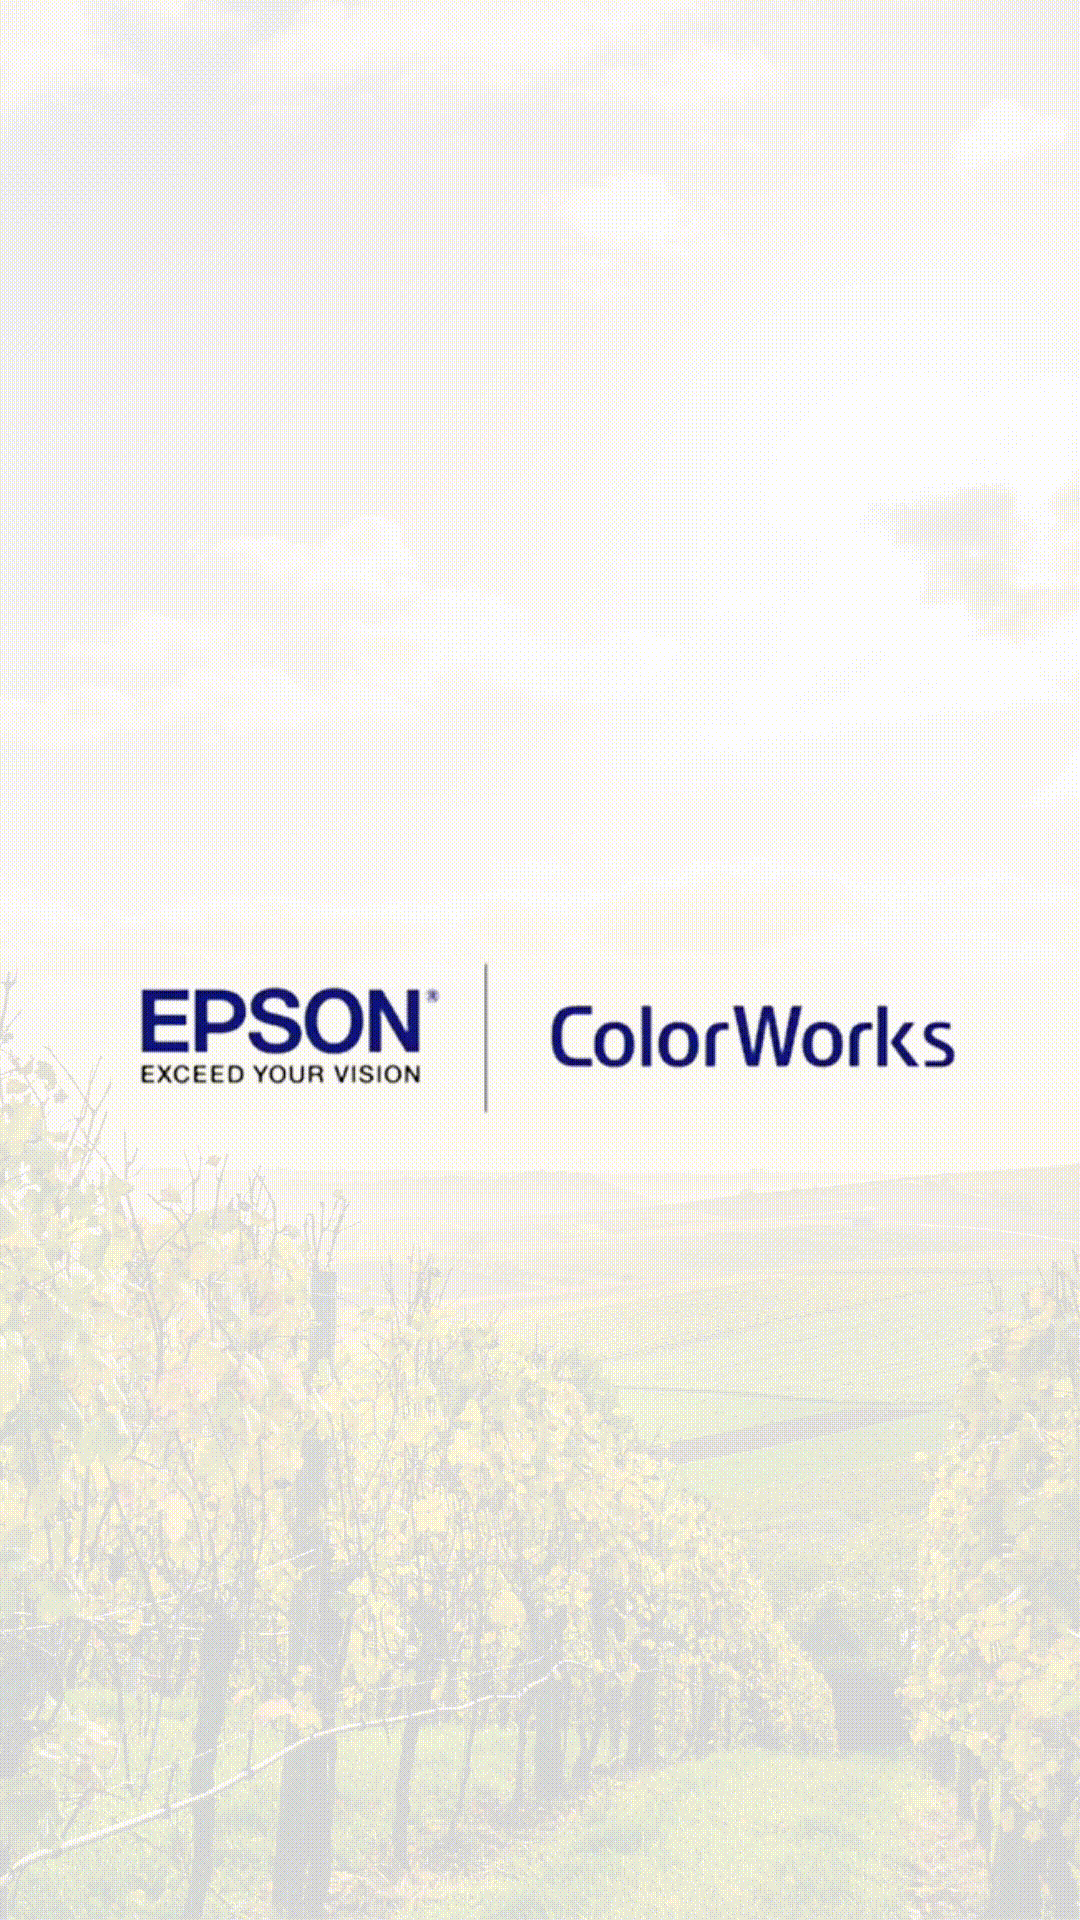 epson_colorworks_mobile_video